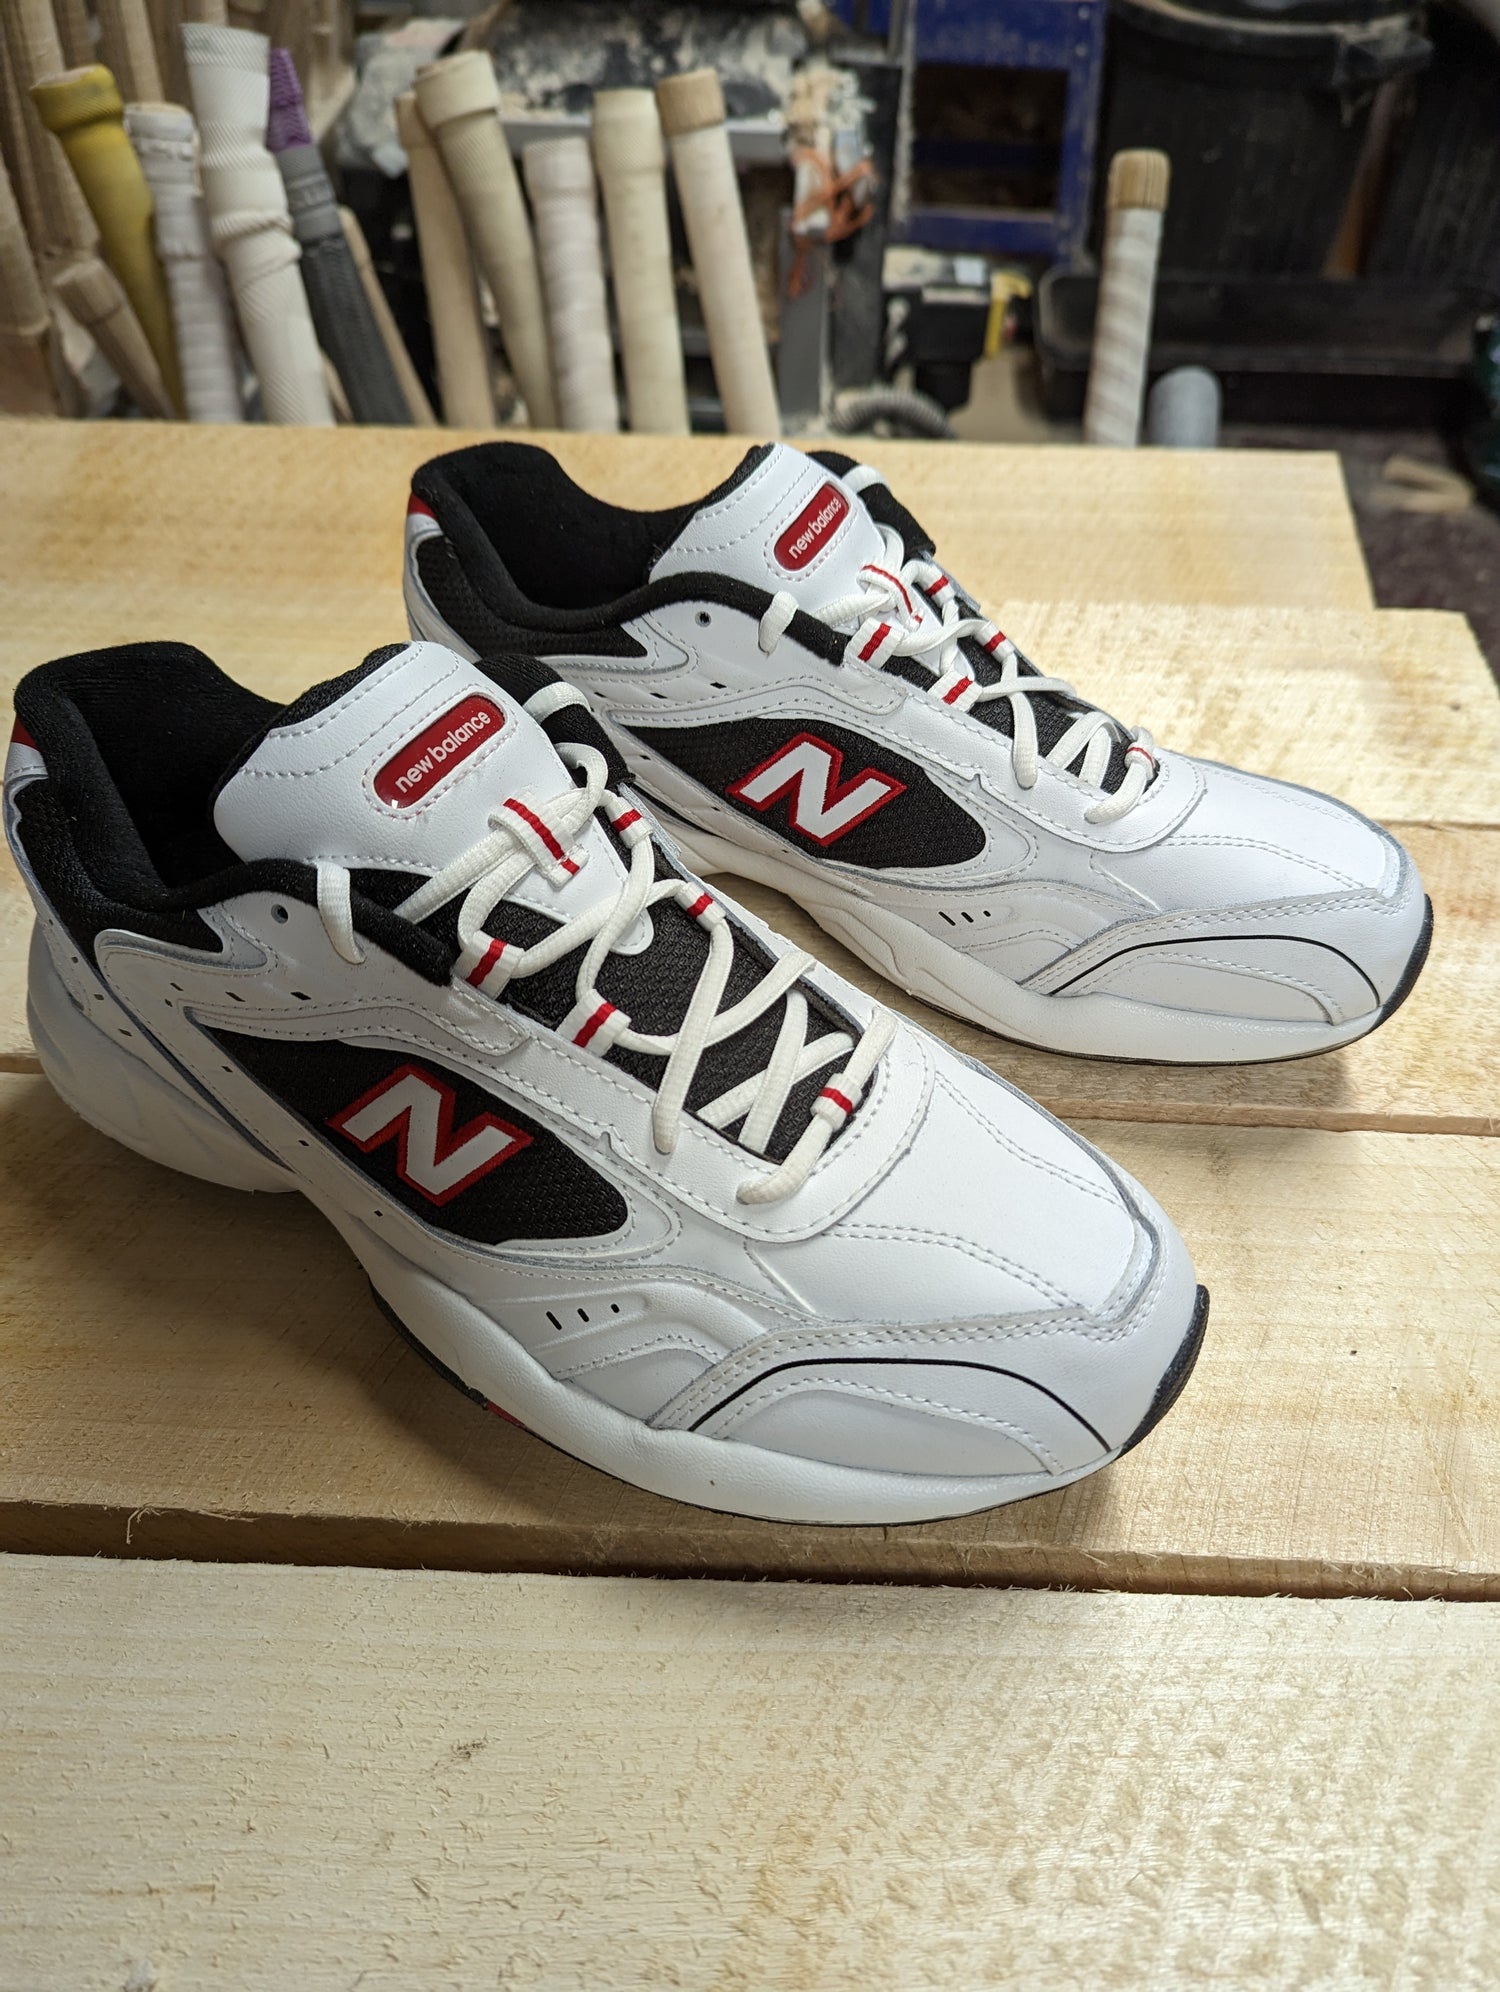 New balance spiked cross trainers